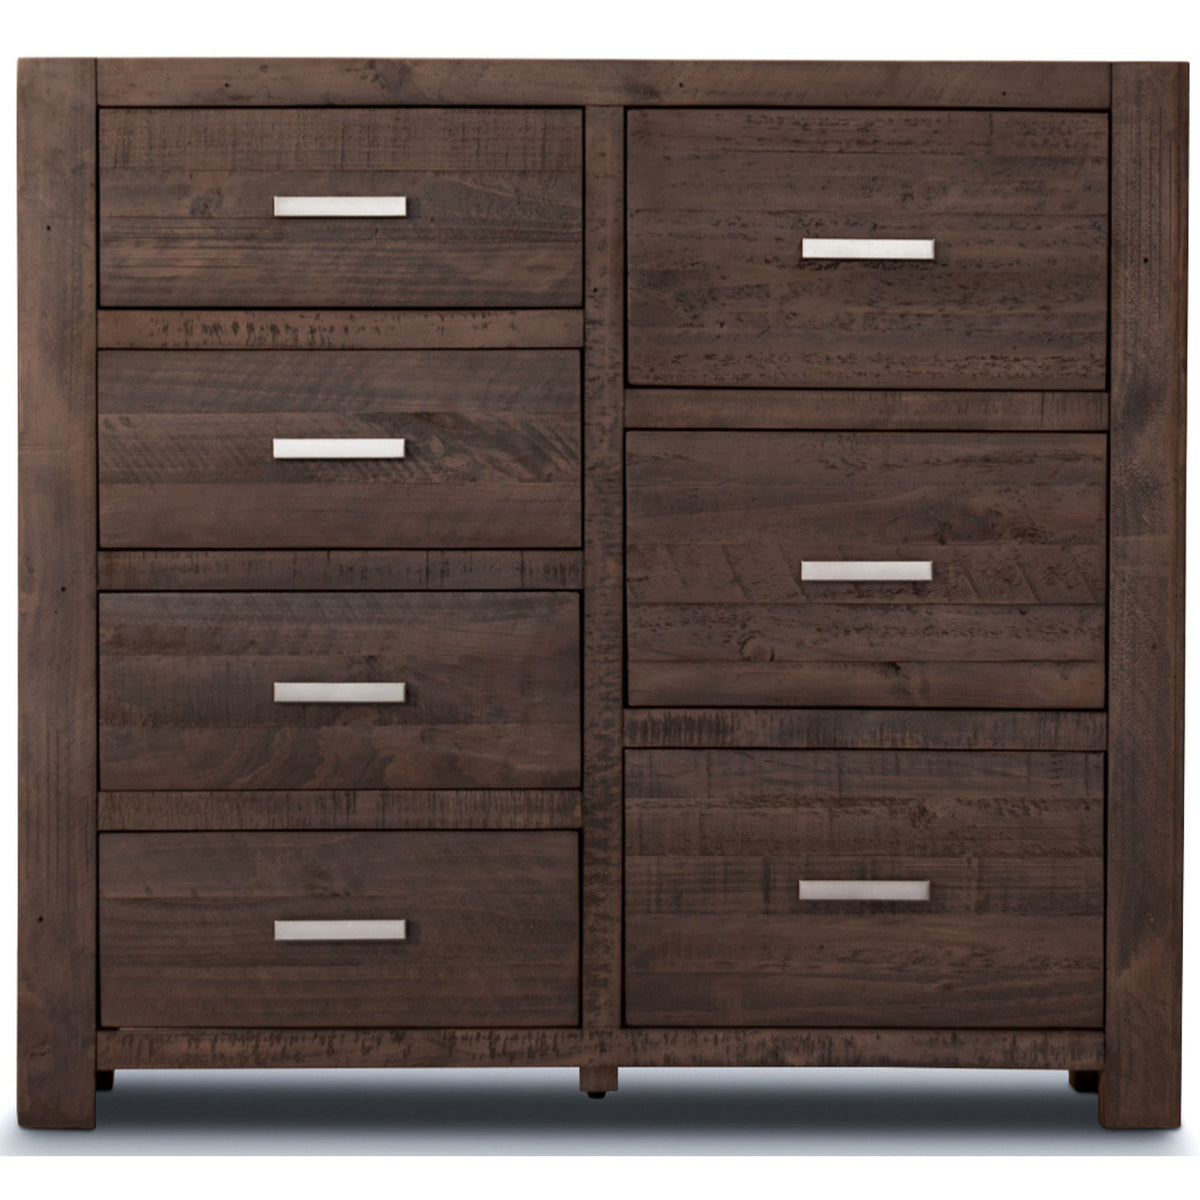 Catmint Tallboy 7 Chest of Drawers Pine Wood Bed Storage Cabinet - Grey Stone